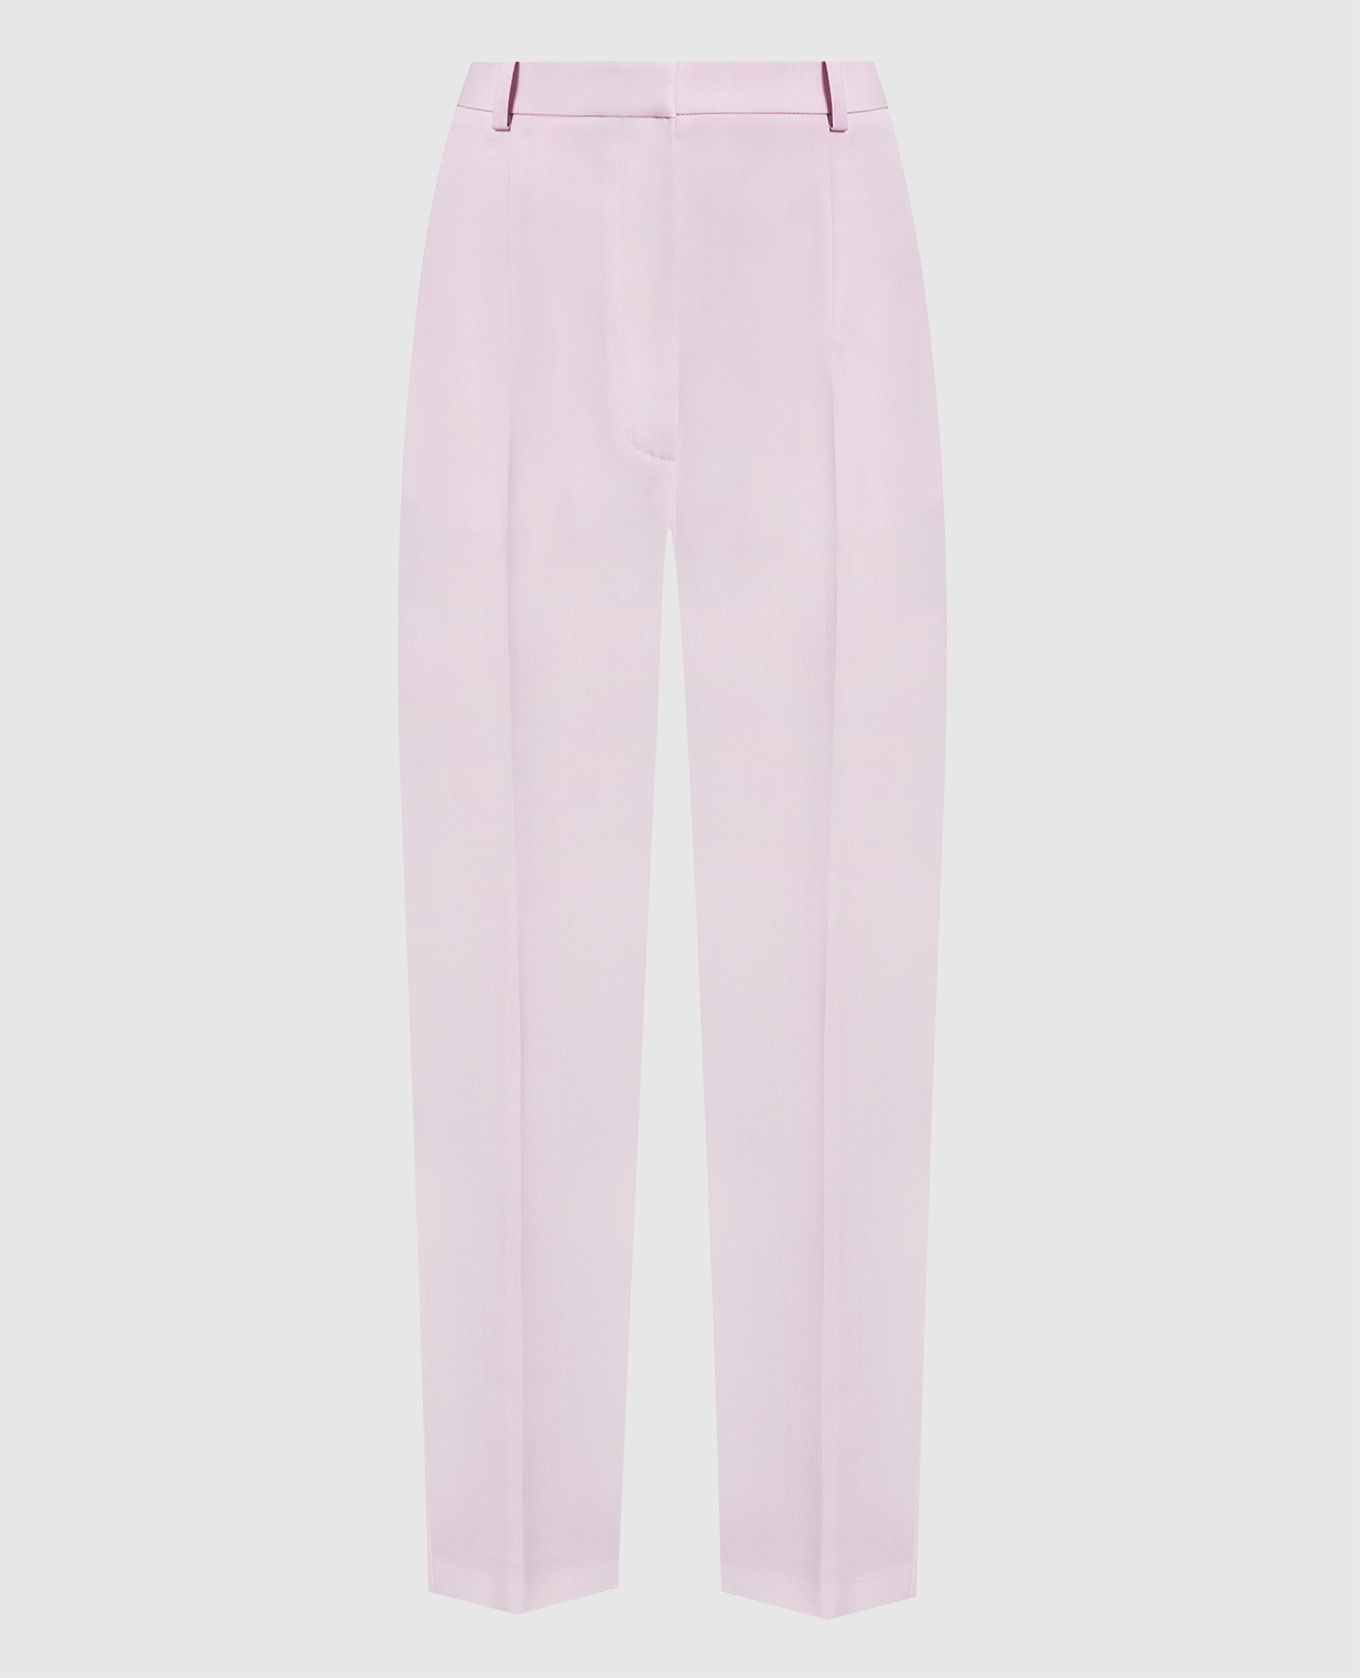 Pink pants made of wool